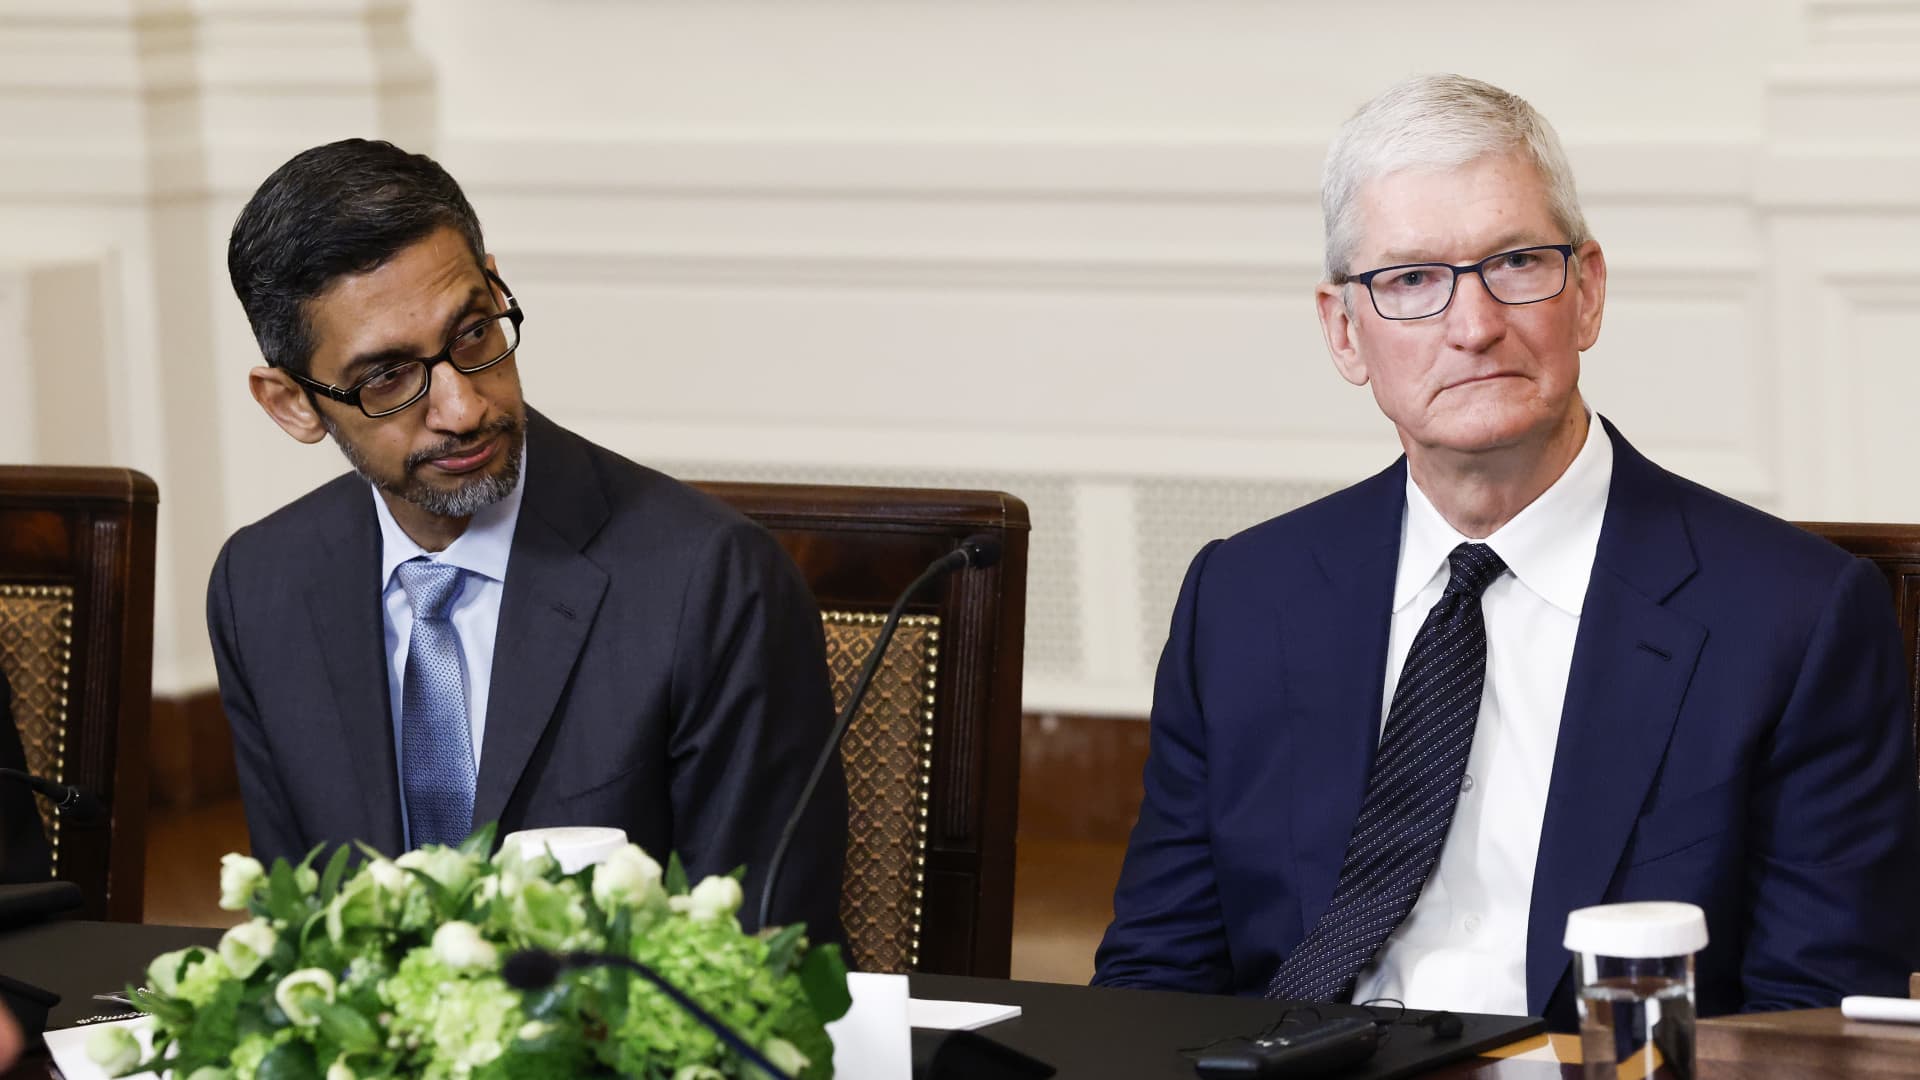 Governments are spying on Apple and Google users through phone notifications, U.S. senator says 